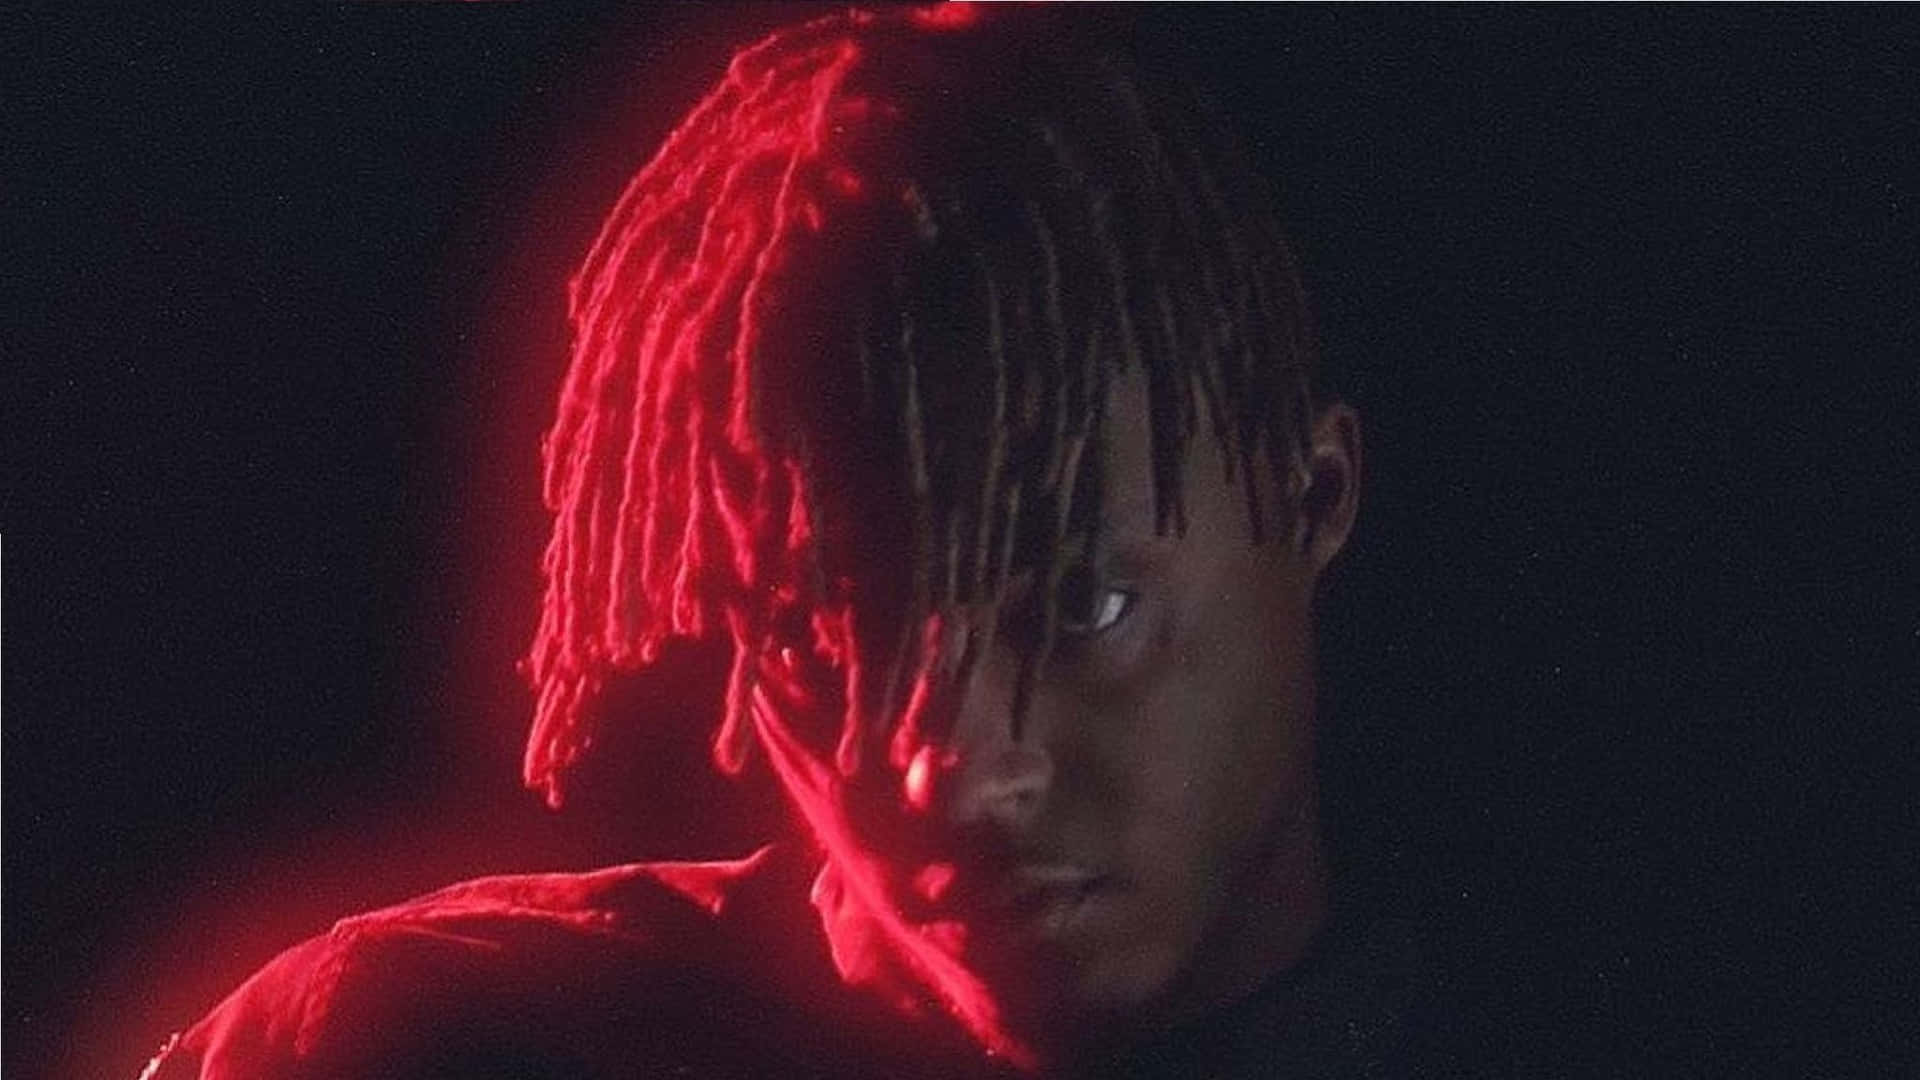 Juice Wrld performing an electrifying live show Wallpaper